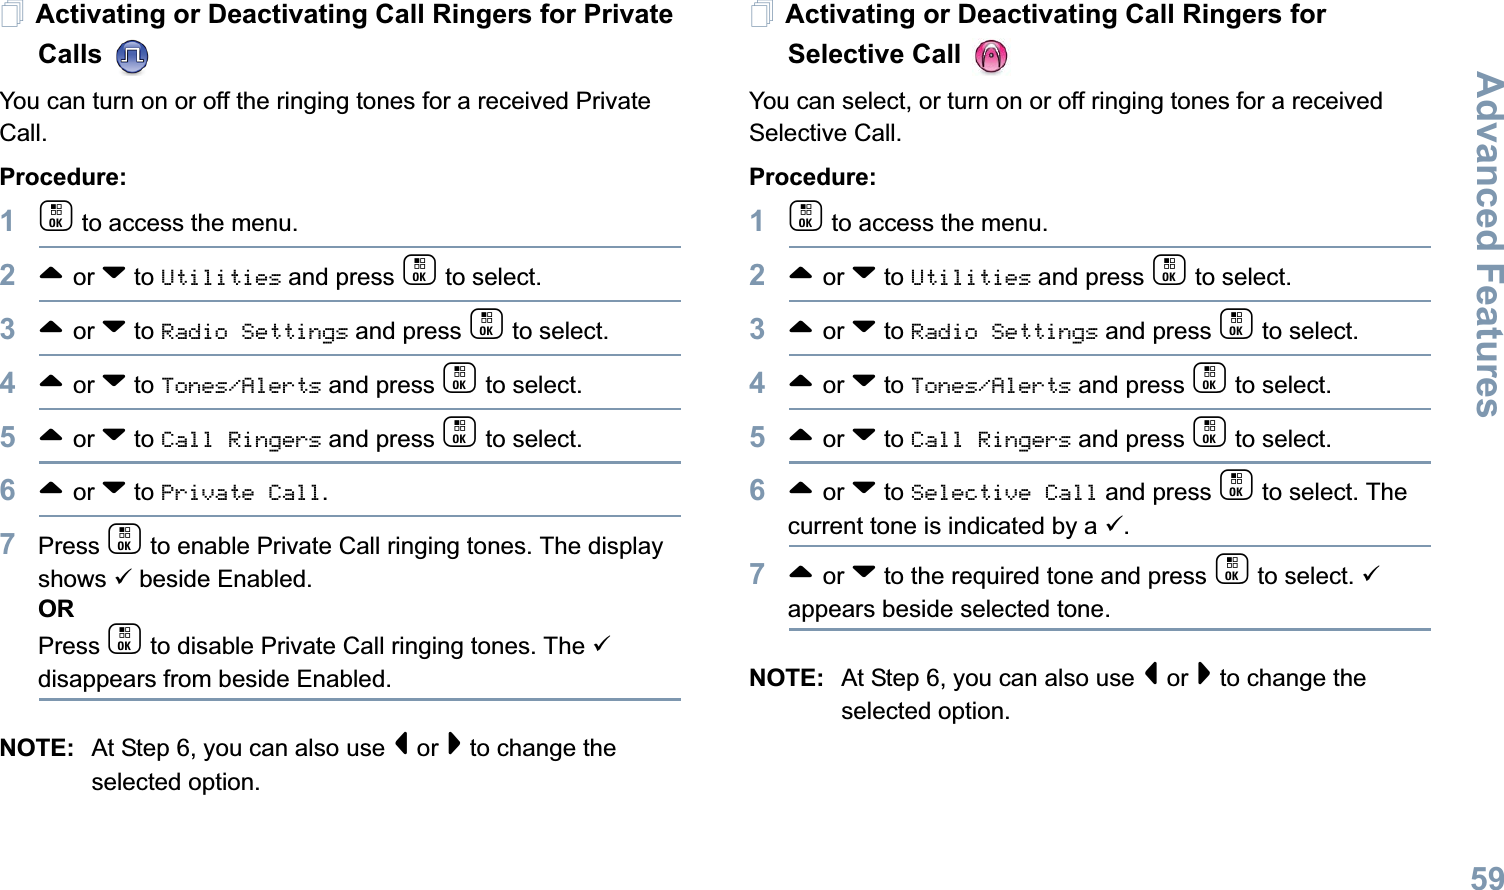 Advanced FeaturesEnglish59Activating or Deactivating Call Ringers for Private Calls You can turn on or off the ringing tones for a received Private Call.Procedure:1c to access the menu.2^ or v to Utilities and press c to select.3^ or v to Radio Settings and press c to select.4^ or v to Tones/Alerts and press c to select.5^ or v to Call Ringers and press c to select.6^ or v to Private Call.7Press c to enable Private Call ringing tones. The display shows 9 beside Enabled.ORPress c to disable Private Call ringing tones. The 9 disappears from beside Enabled.NOTE: At Step 6, you can also use &lt; or &gt; to change the selected option.Activating or Deactivating Call Ringers for Selective Call You can select, or turn on or off ringing tones for a received Selective Call.Procedure: 1c to access the menu.2^ or v to Utilities and press c to select.3^ or v to Radio Settings and press c to select.4^ or v to Tones/Alerts and press c to select.5^ or v to Call Ringers and press c to select.6^ or v to Selective Call and press c to select. The current tone is indicated by a 9.7^ or v to the required tone and press c to select. 9 appears beside selected tone. NOTE: At Step 6, you can also use &lt; or &gt; to change the selected option. 